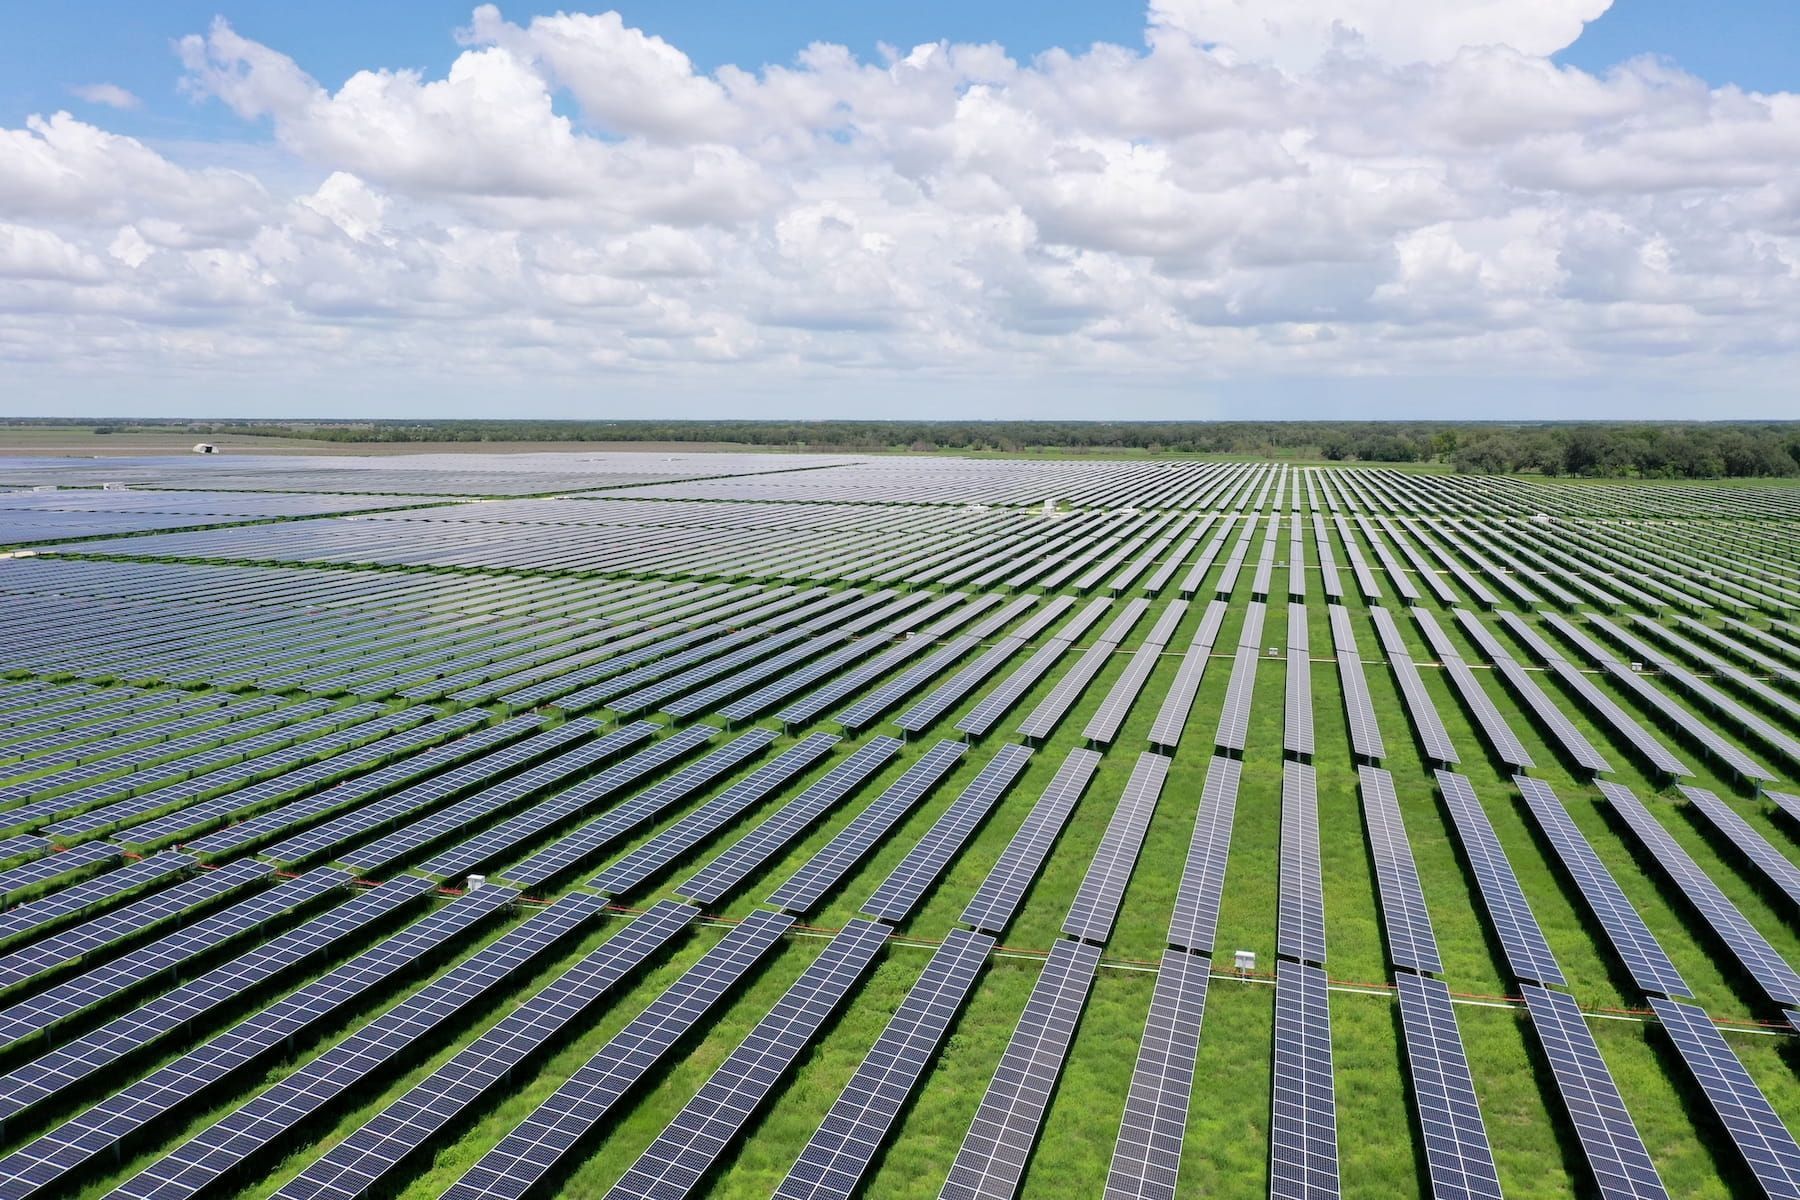 Aerial view of a large field of solar panels.